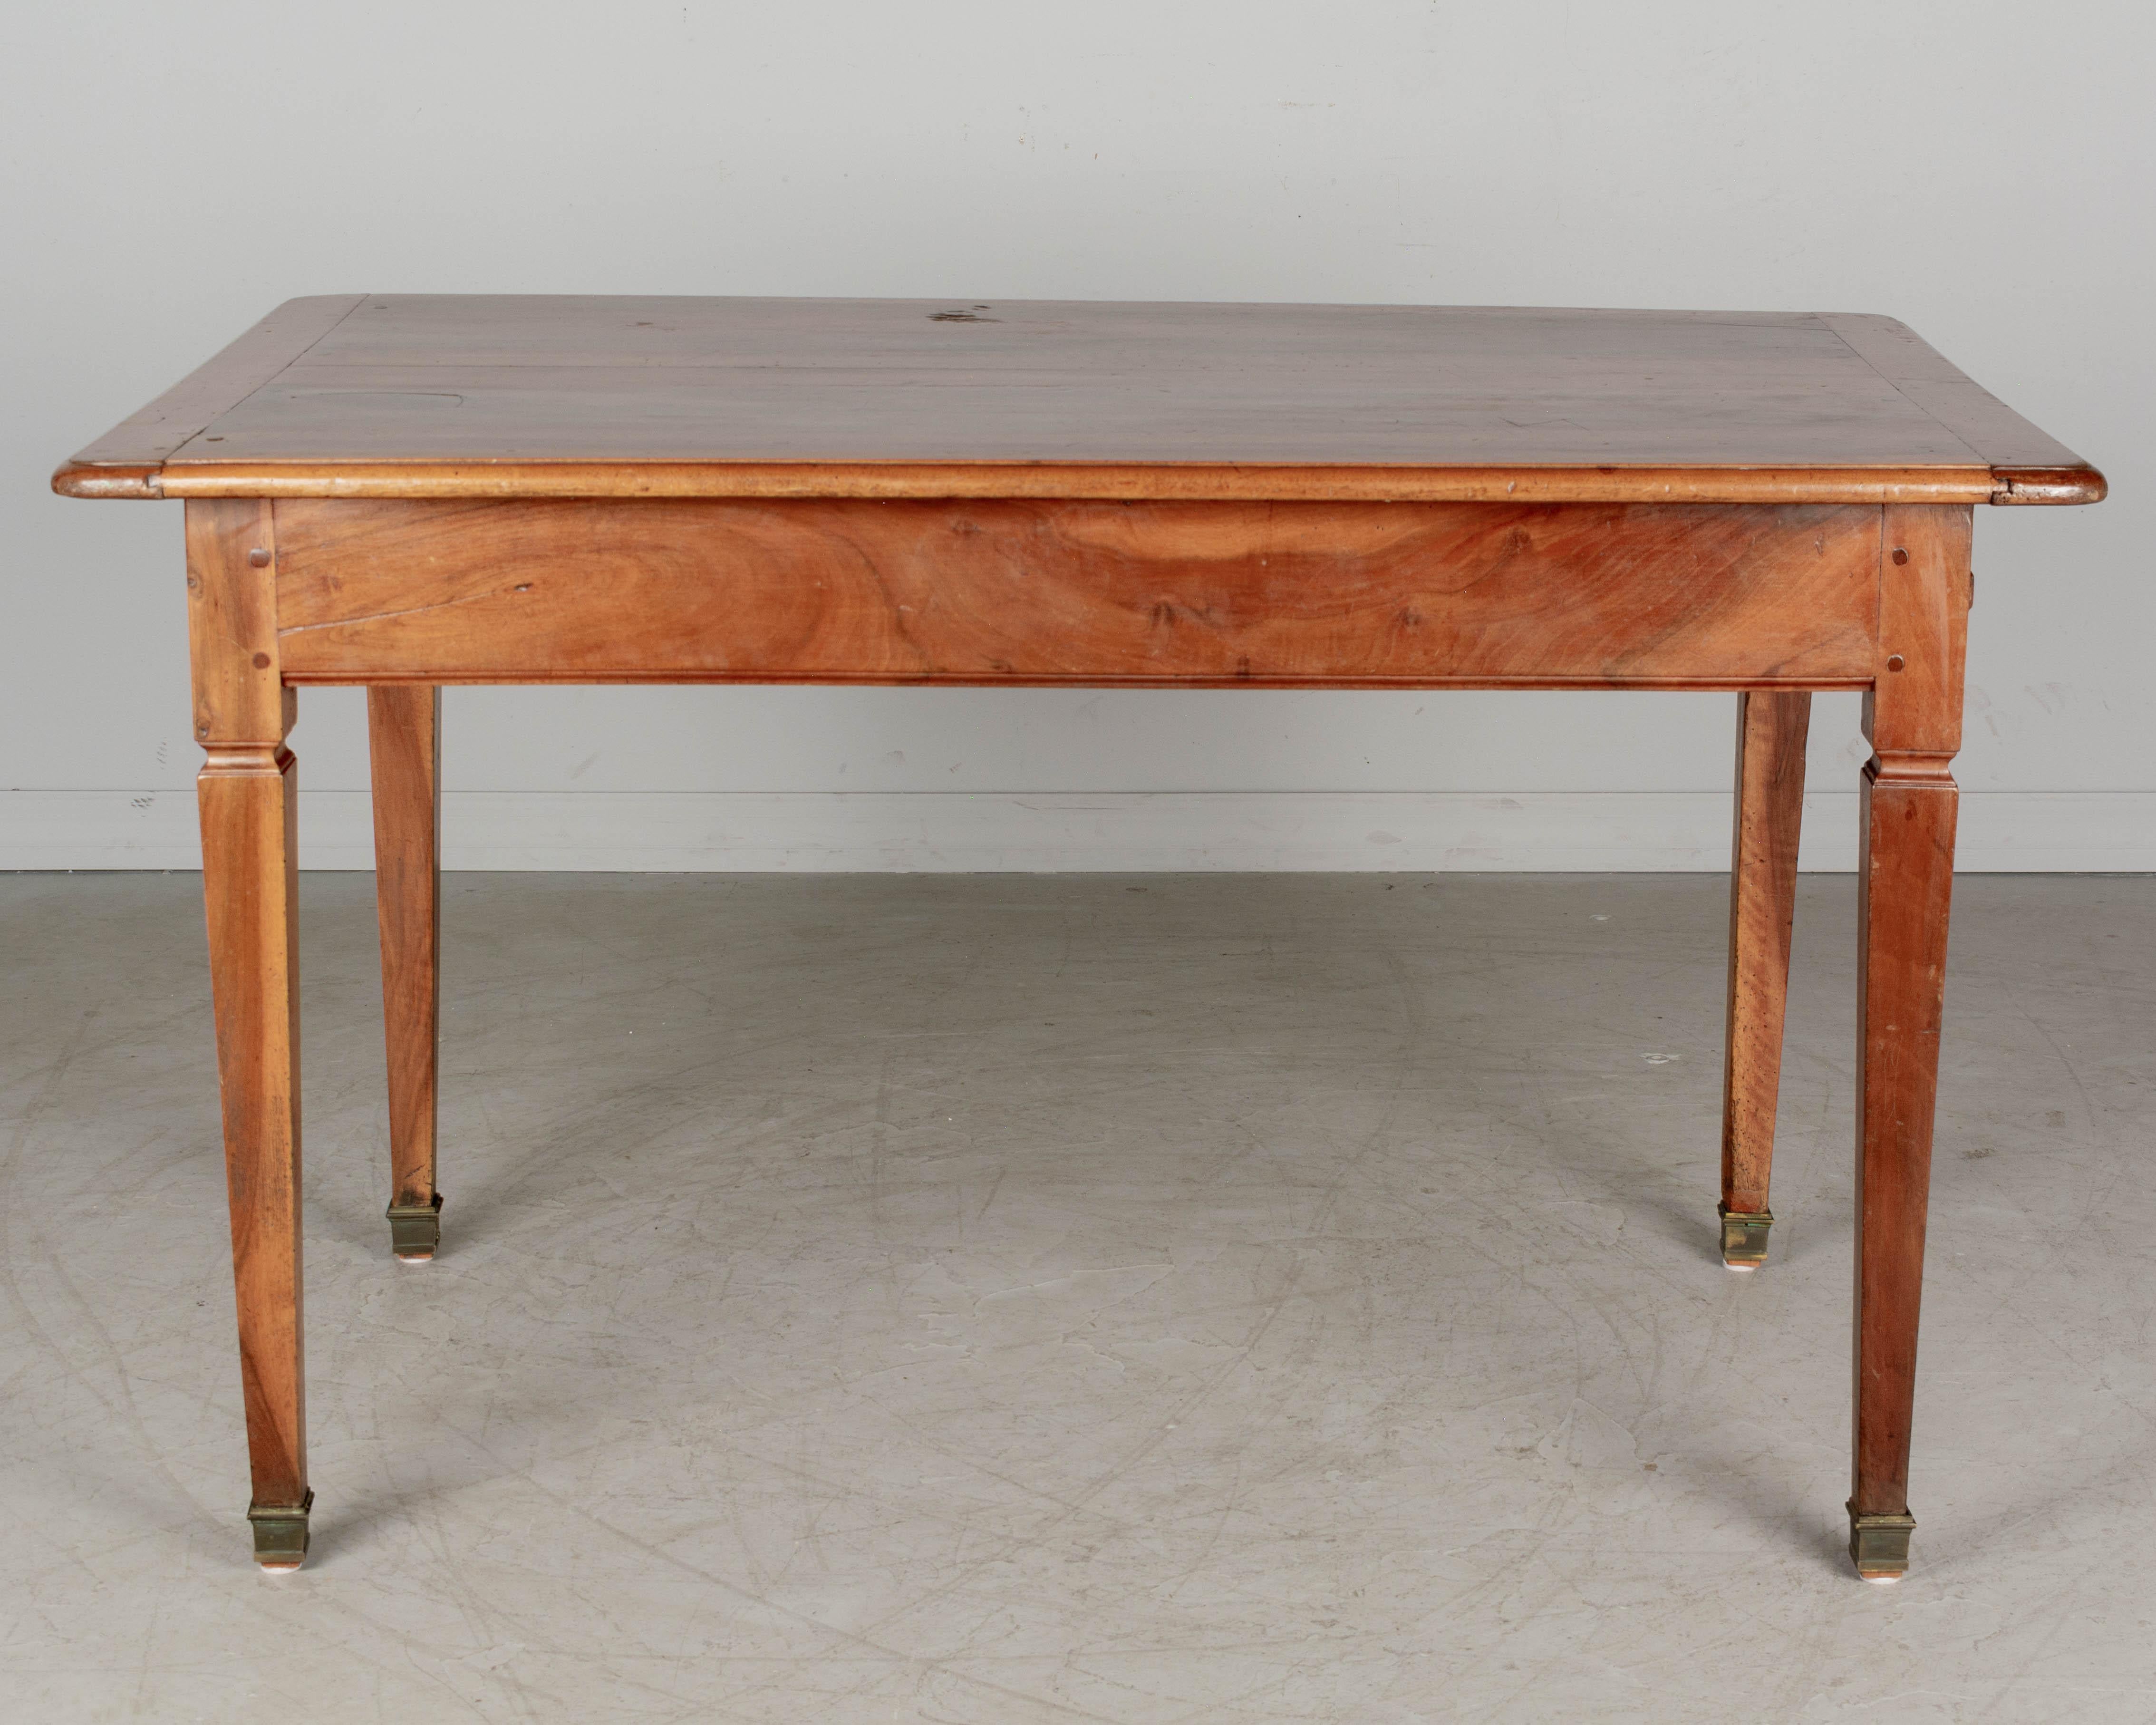 19th Century Country French Walnut Farm Table or Dining Table In Good Condition For Sale In Winter Park, FL